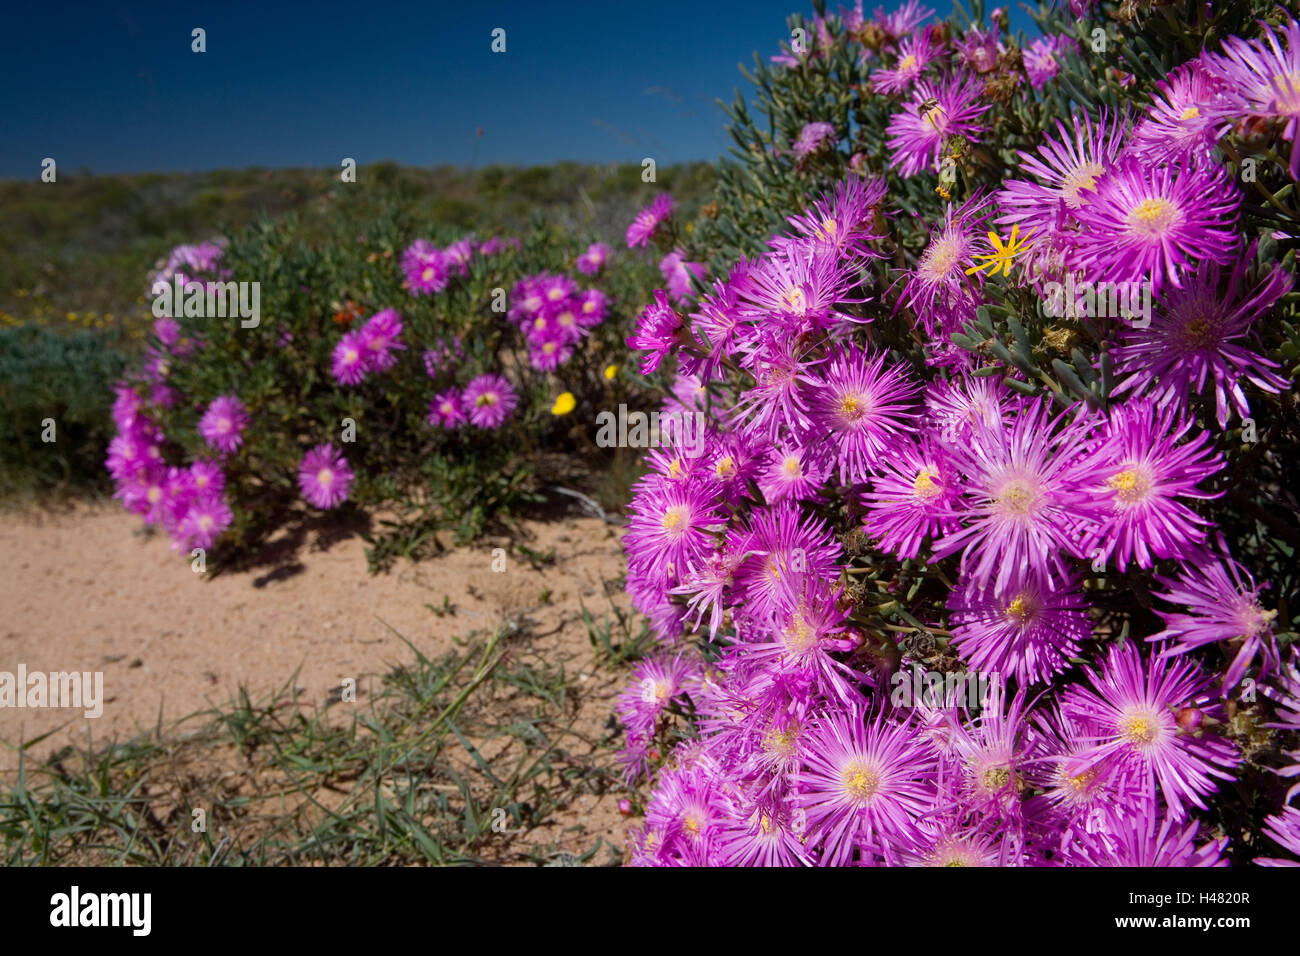 South, Africa, Namaqualand, spring blossom, midday flowers, Stock Photo